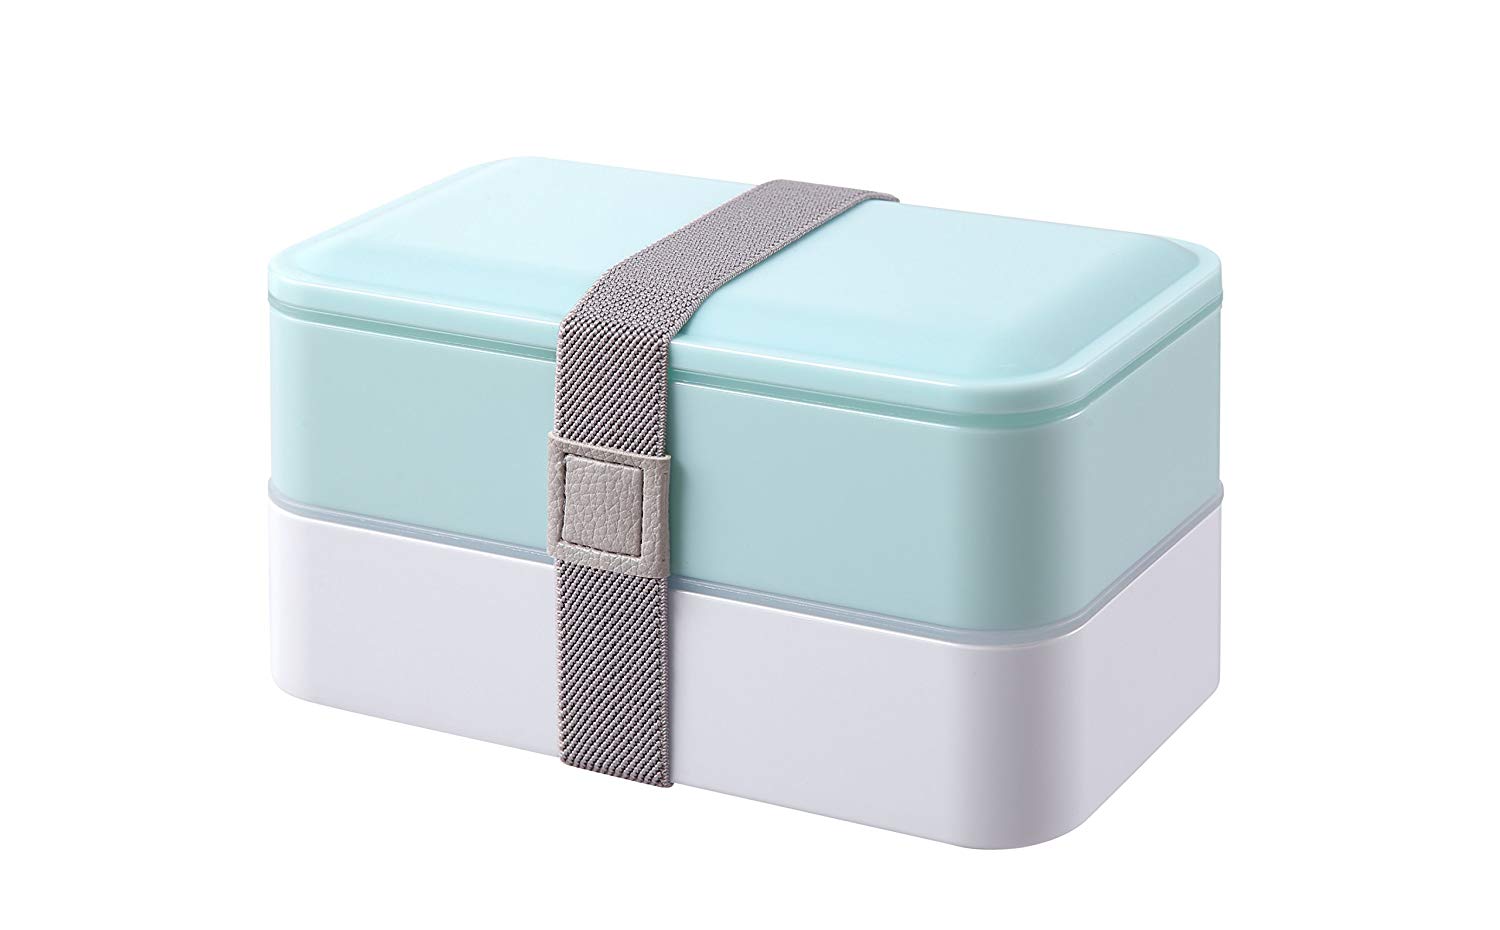 Bento Box 2 Tiers Bento Lunch Box Lunch Boxes with Reusable Cutlery Japanese Style for Microwave Freezer Dishwasher Bento Boxes for Kids Adults Work School - Pastel Blue PuTwo - image 1 of 6